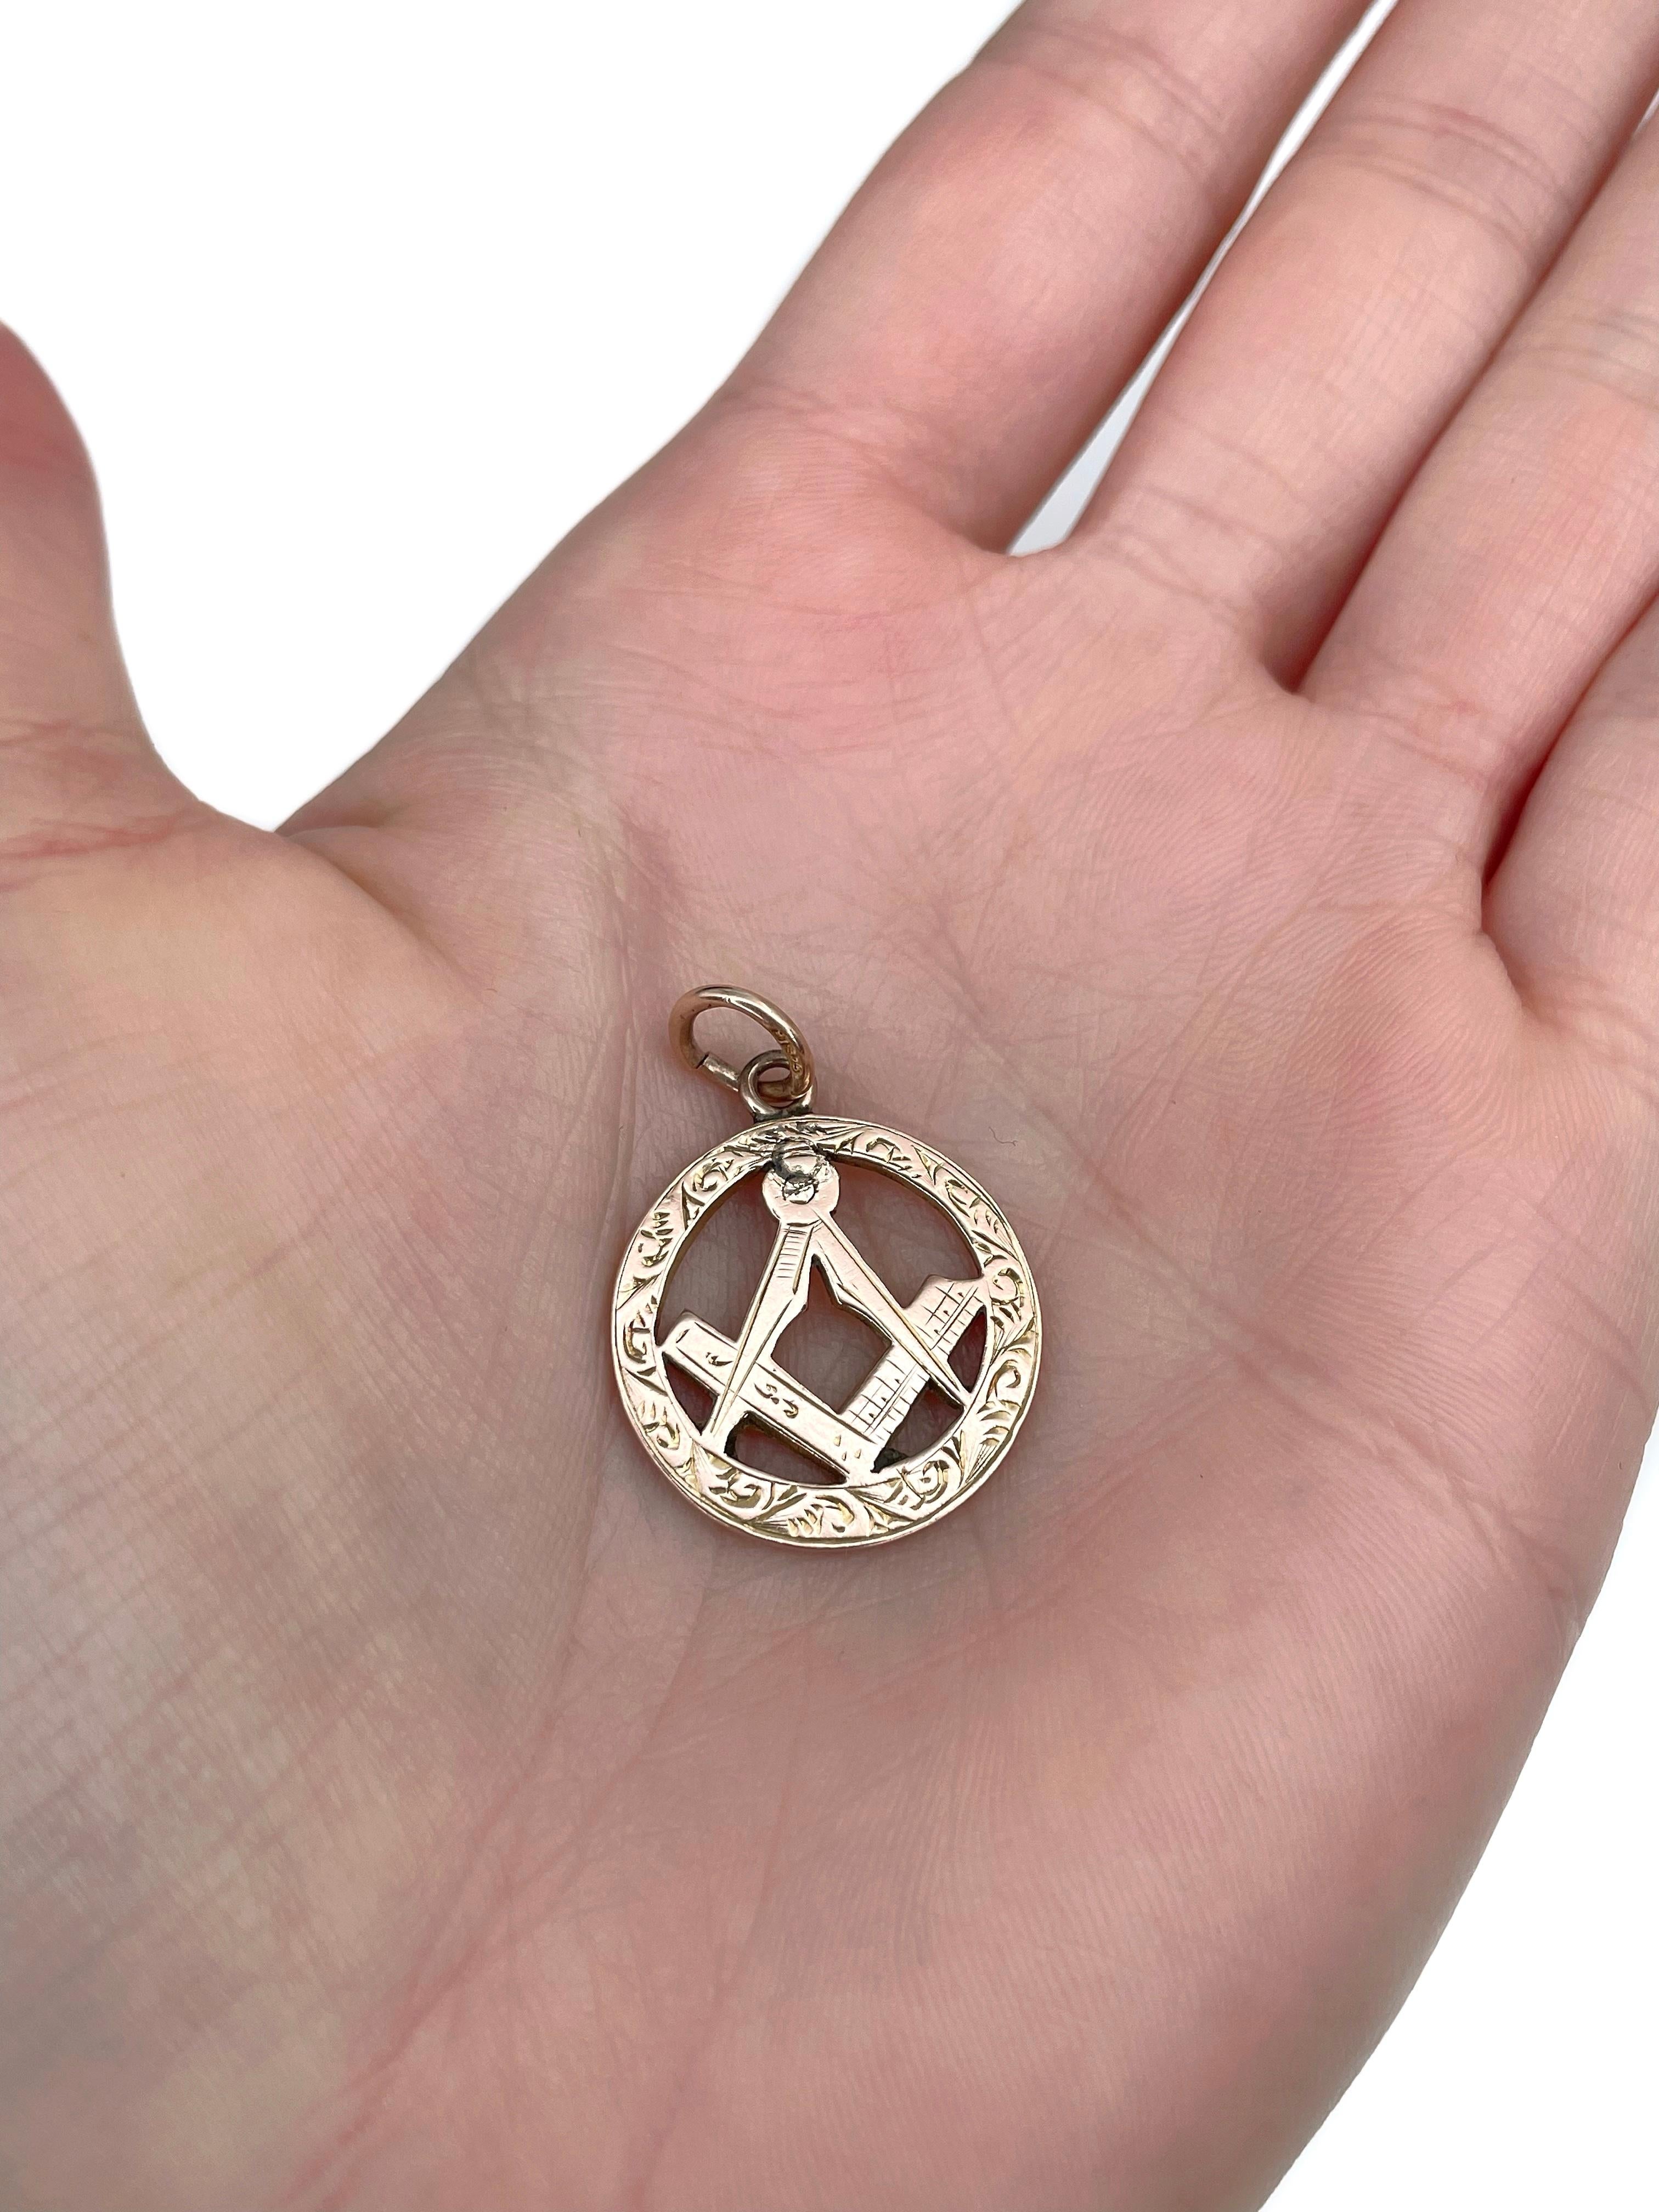 This is a Masonic charm pendant depicting the “Square and Compasses”.  It is crafted in 9K gold. 

Circa 1920
Maker’s mark: W.O.D

Weight: 3.46g
Size: 3x2cm

———

If you have any questions, please feel free to ask. We describe our items accurately.